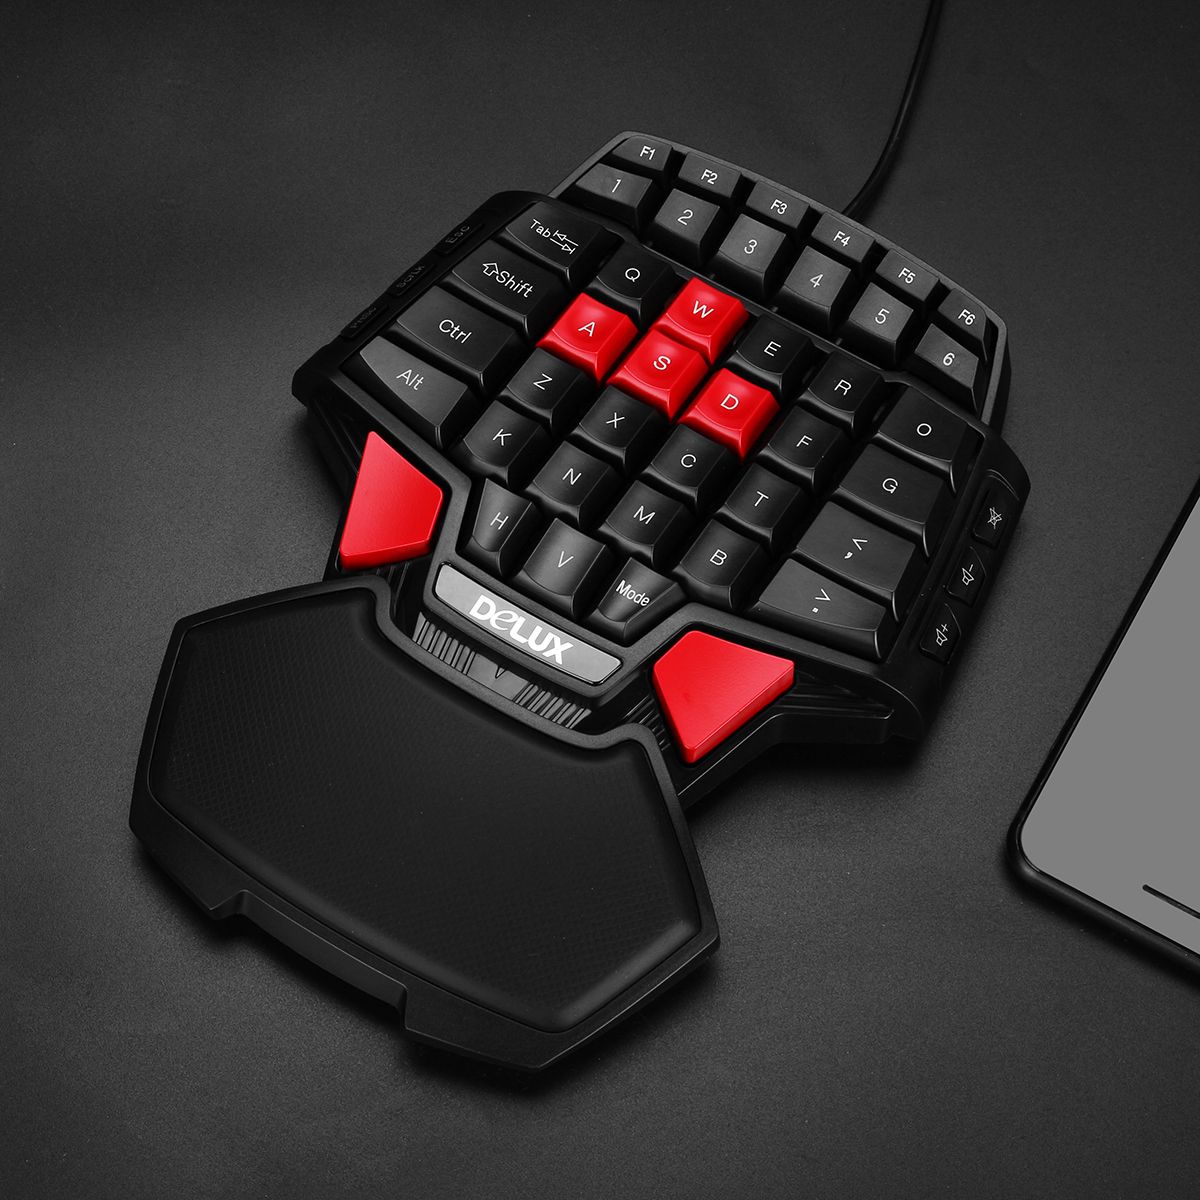 Single-Hand-Gaming-Keyboard-USB-Wired-Keypad-3200-dpi-Mouse-for-PS4-PC-Game-One-handed-Ergonomic-Key-1716549